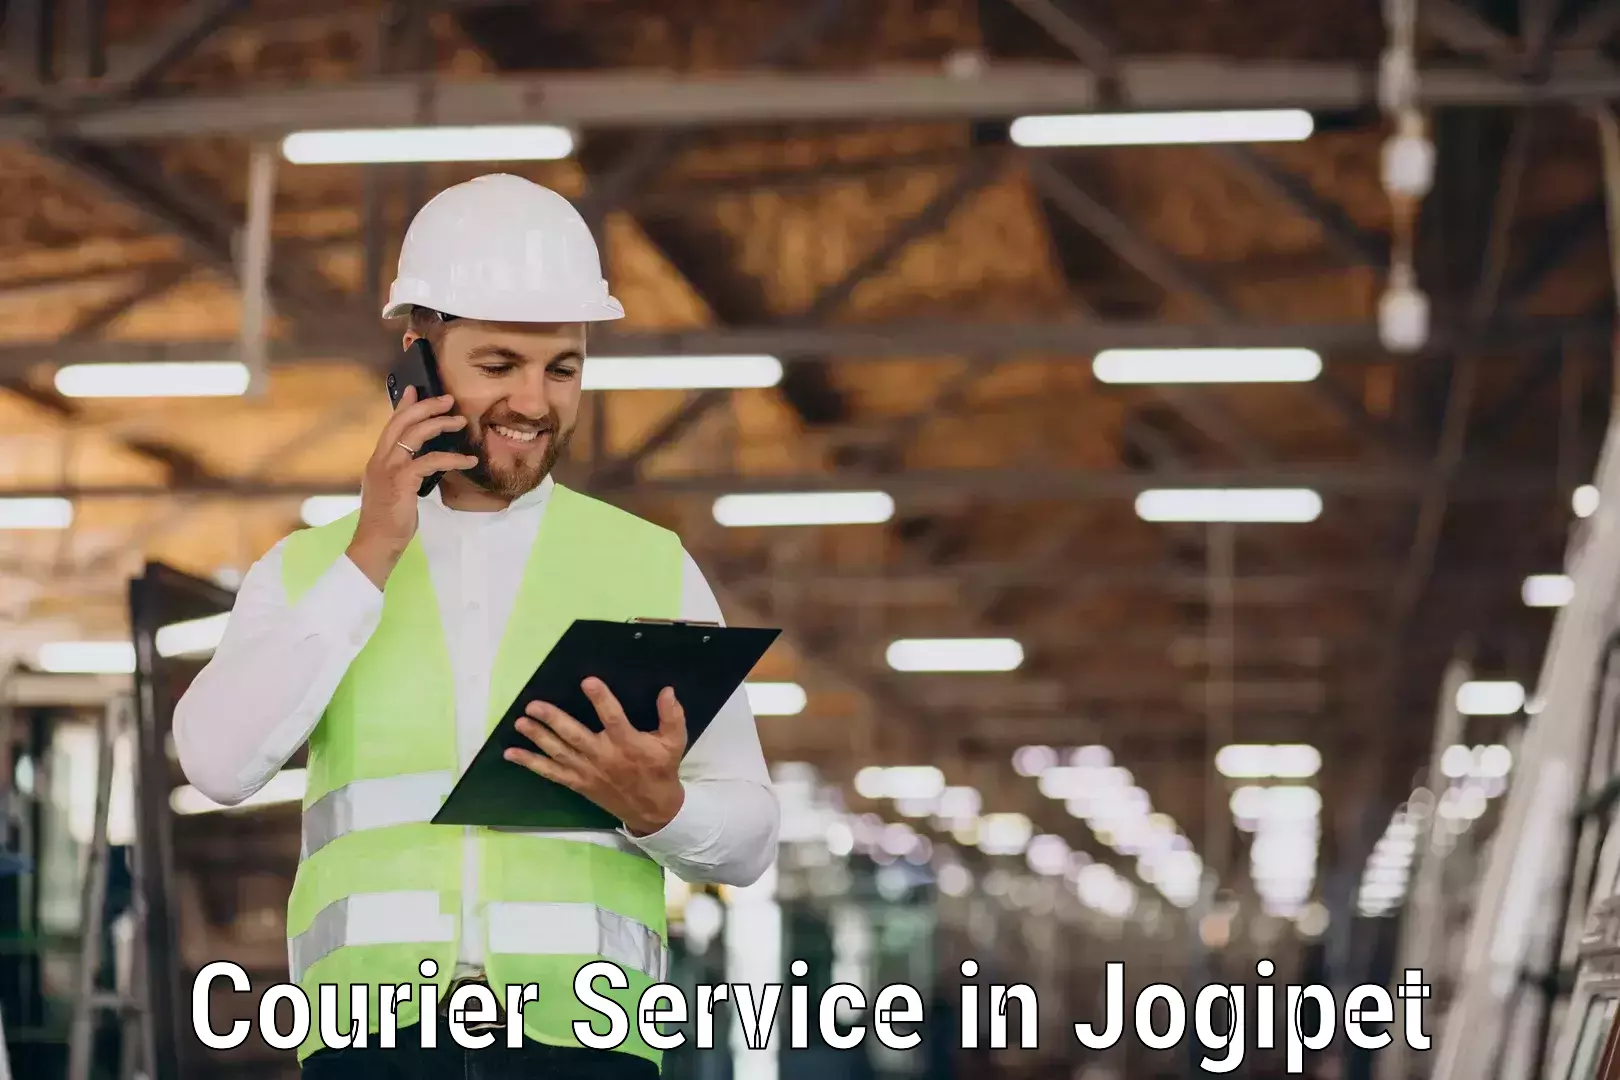 Local delivery service in Jogipet